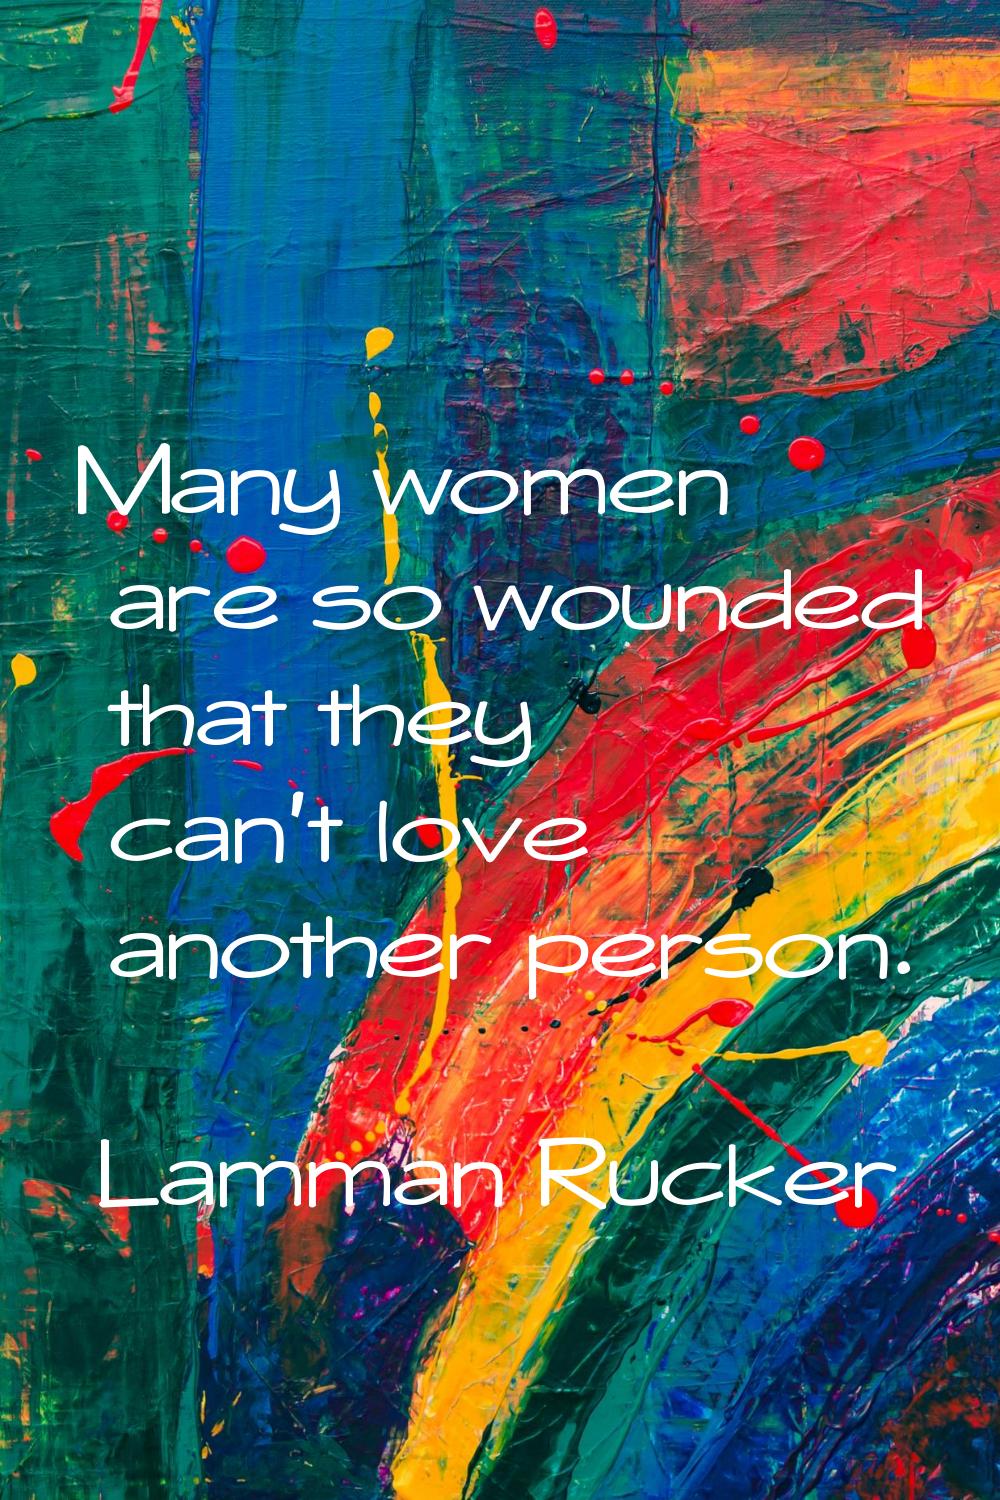 Many women are so wounded that they can't love another person.